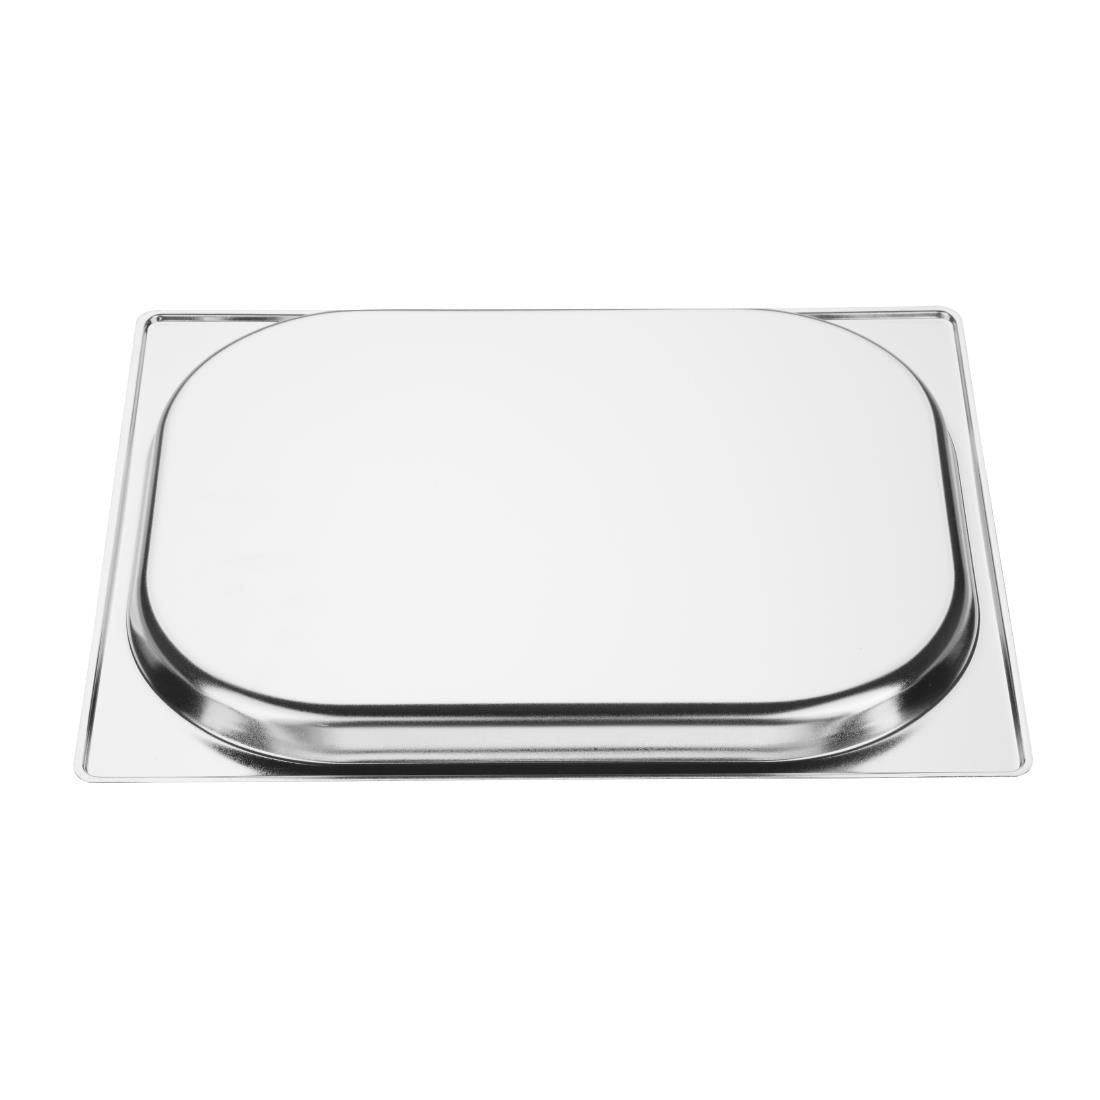 Vogue Stainless Steel 1/2 Gastronorm Pan 20mm